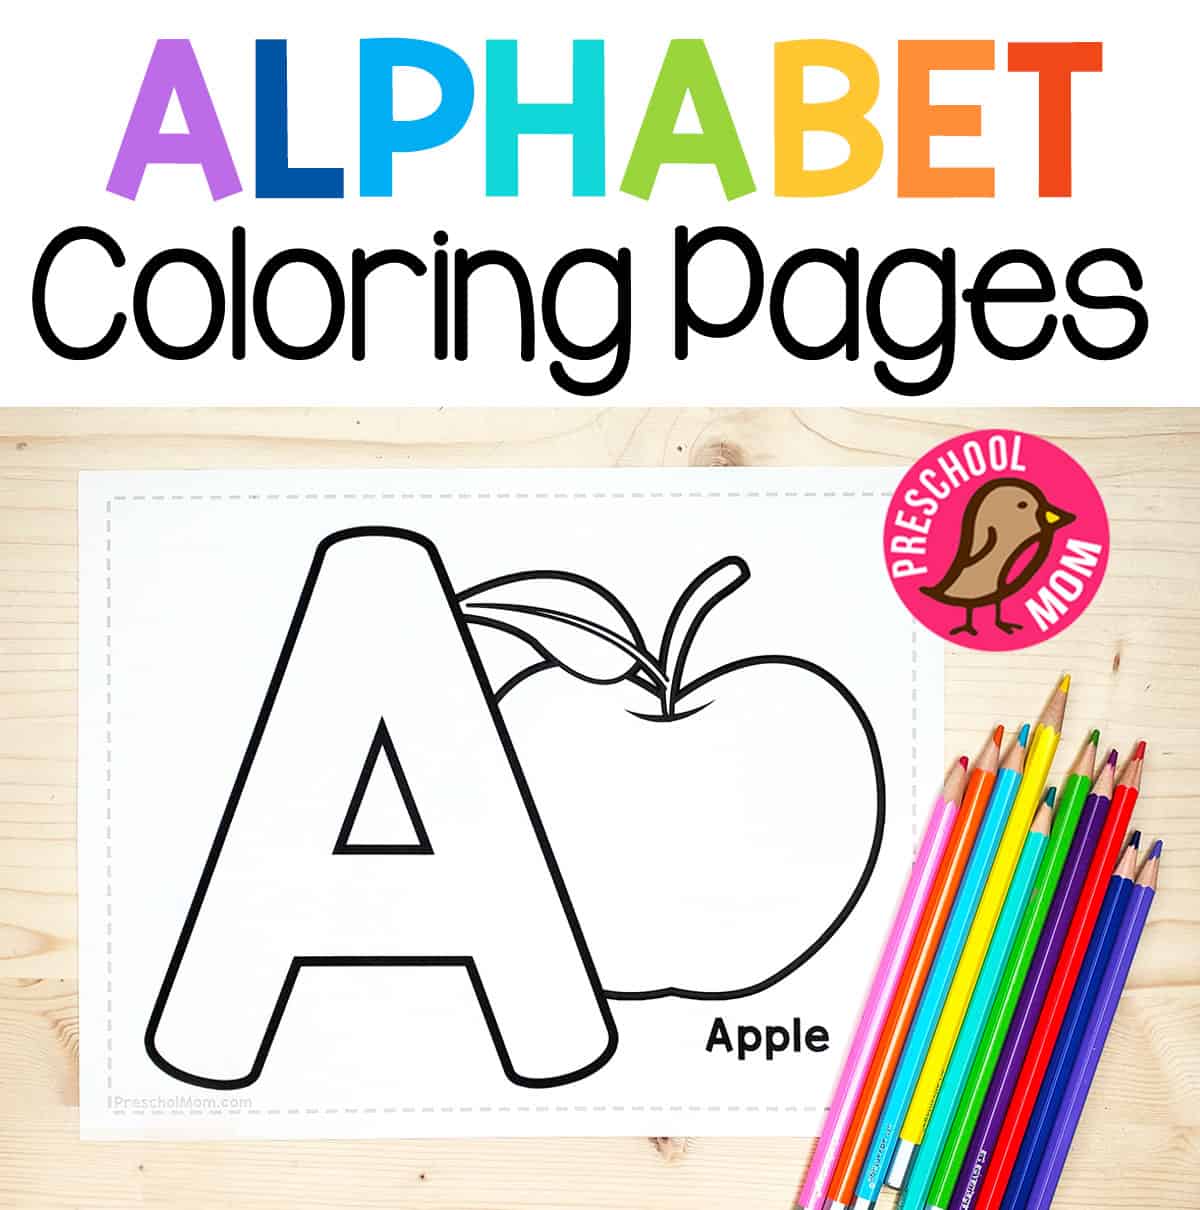 Alphabet coloring pages